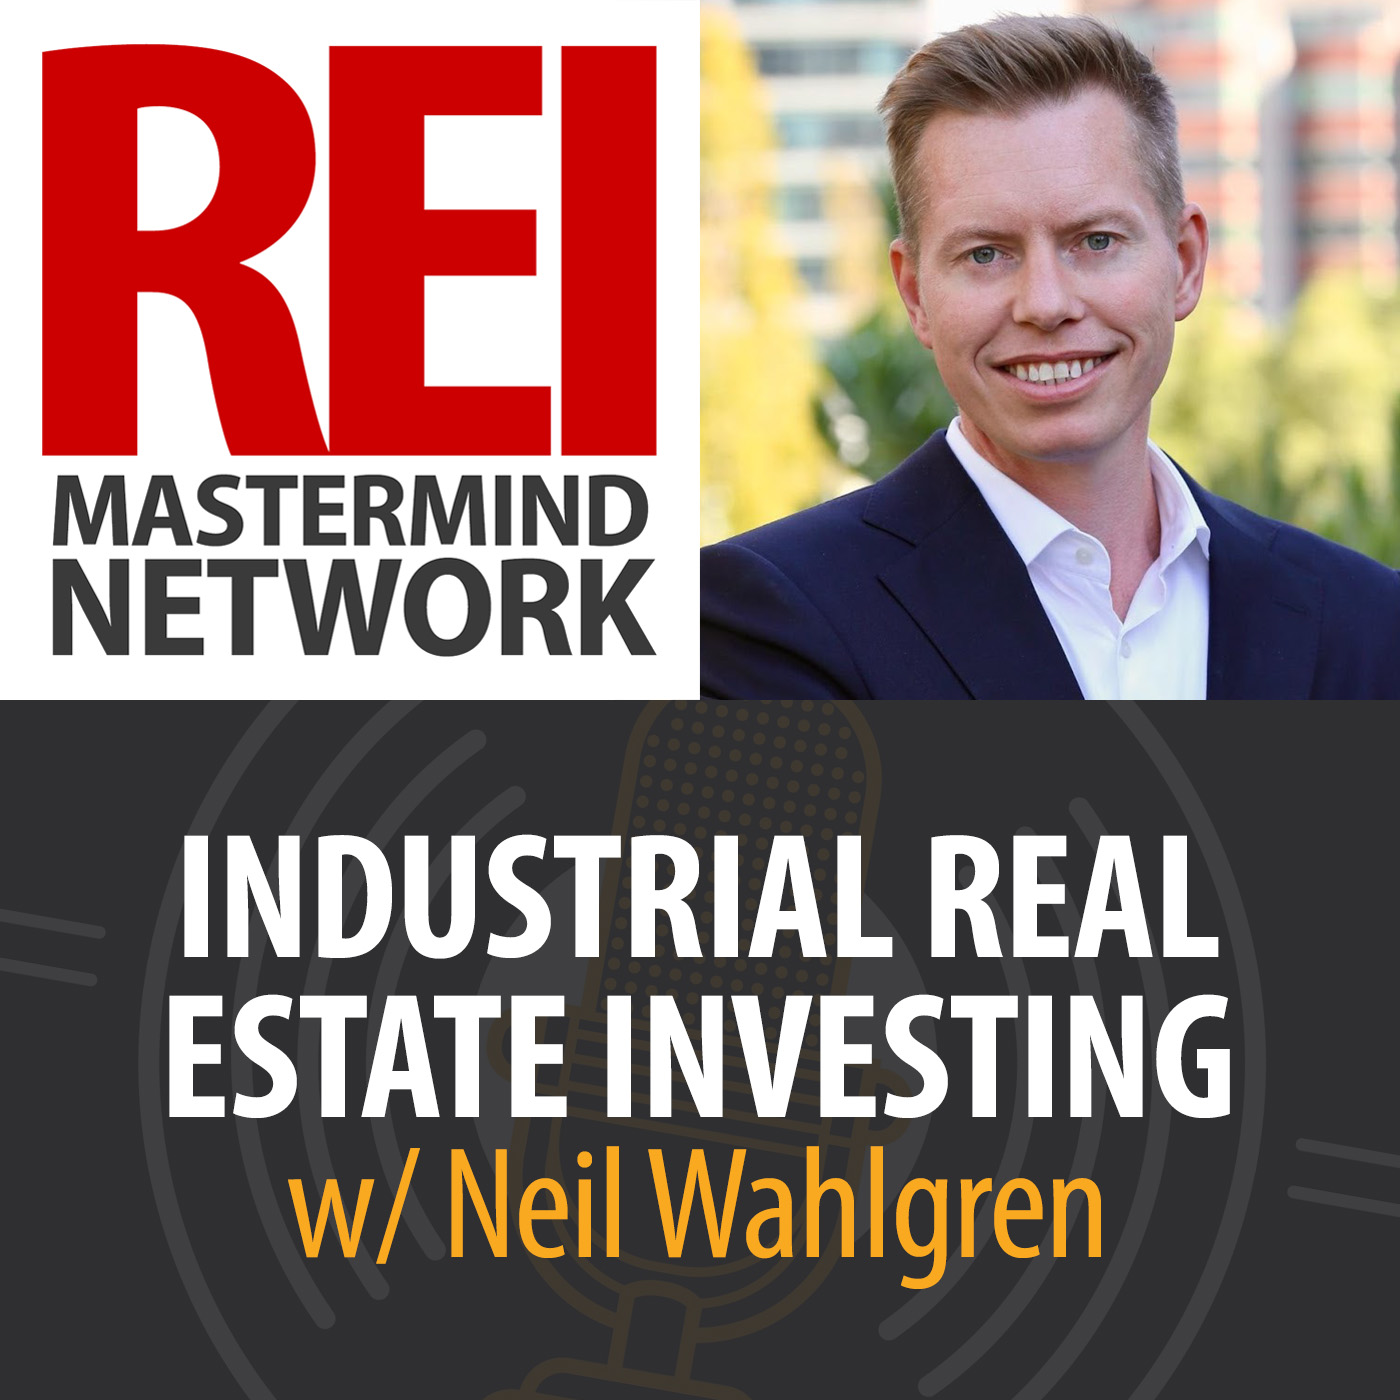 Industrial Real Estate Investing with Neil Wahlgren